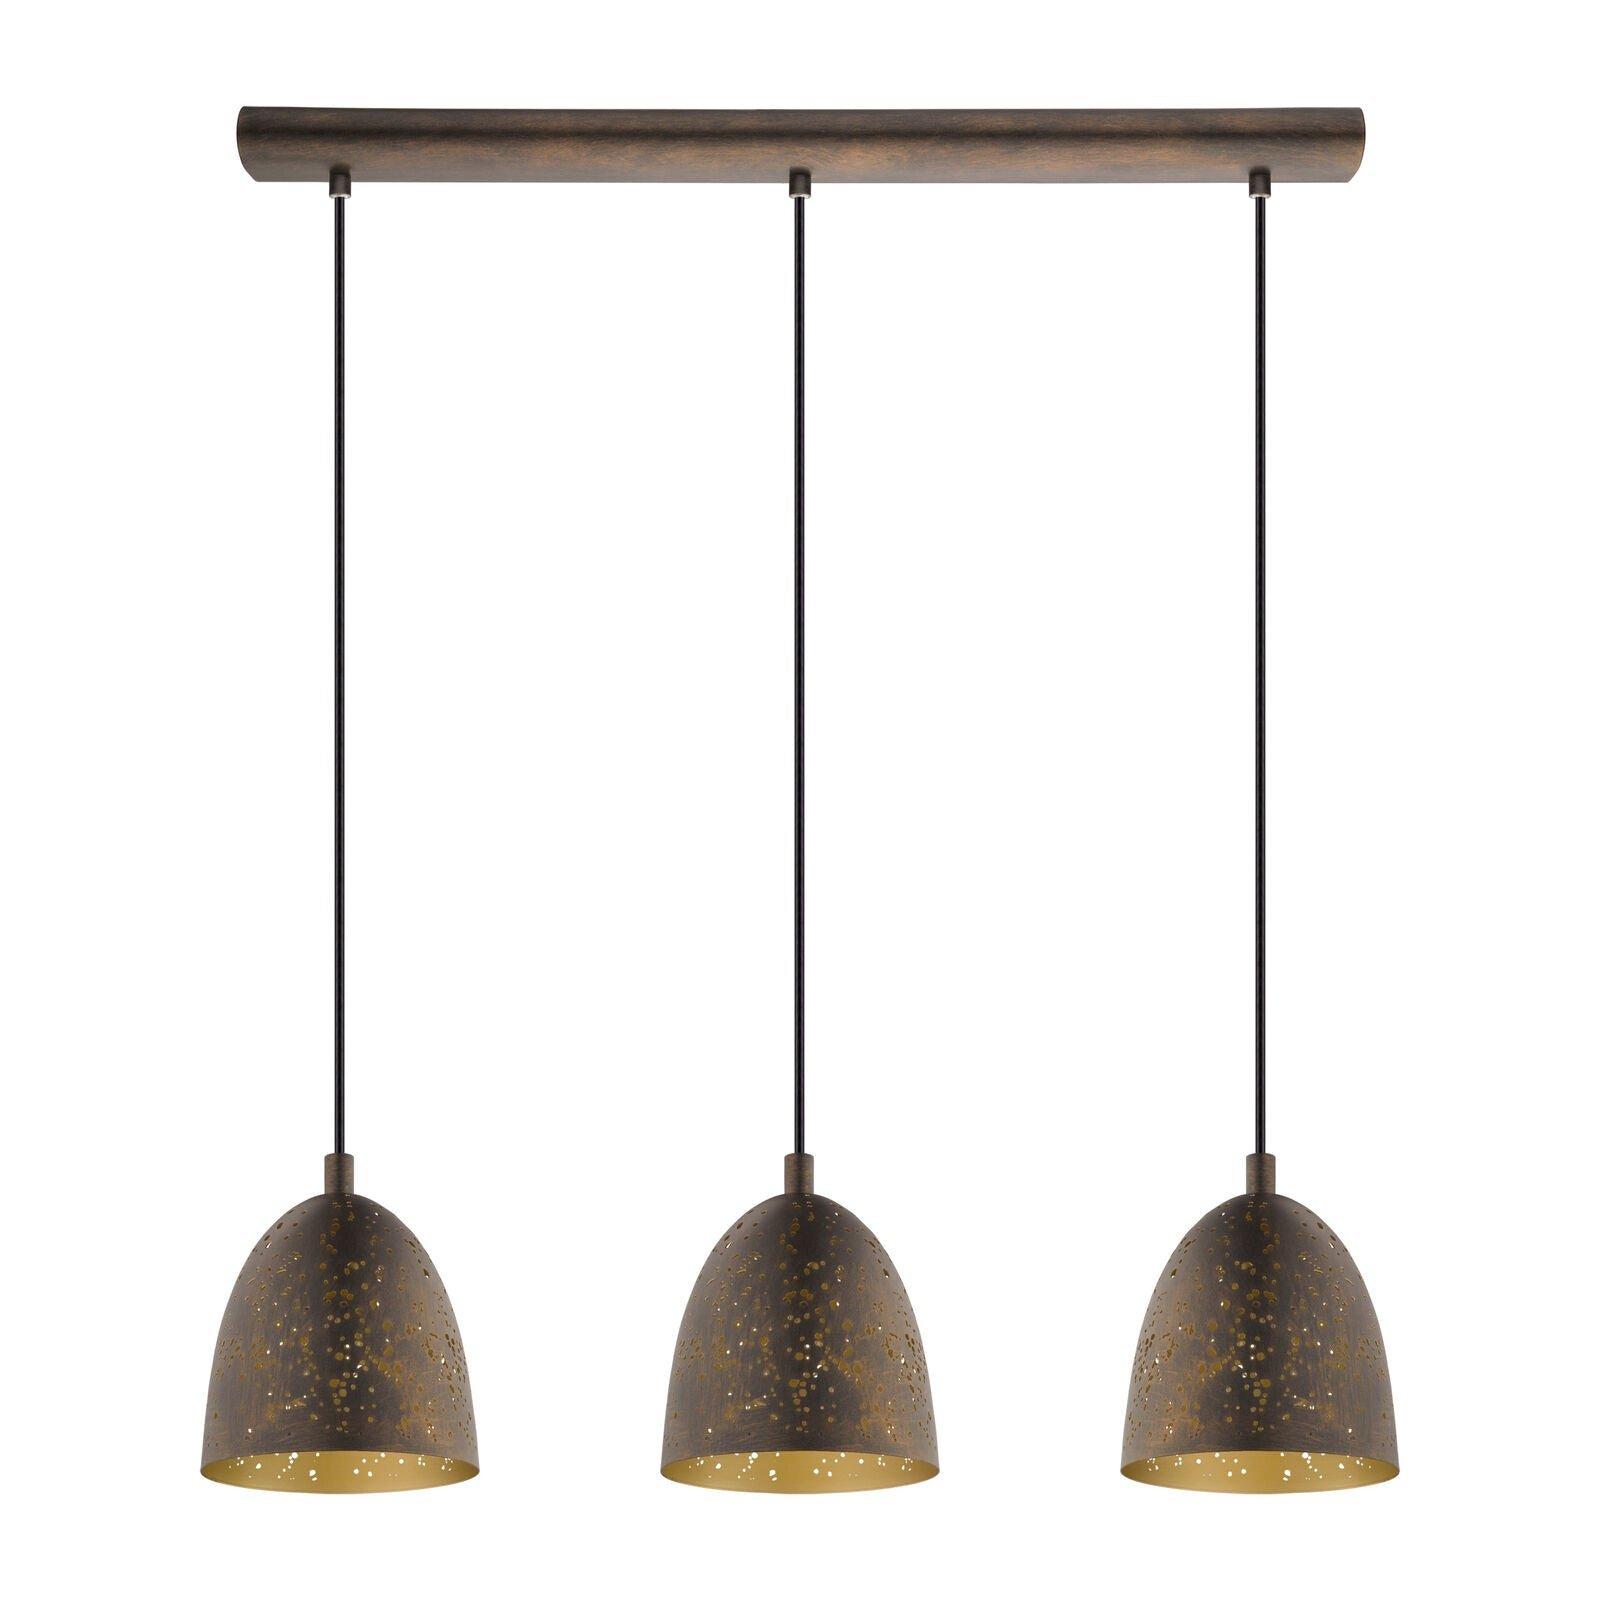 Hanging Ceiling Pendant Light Brown & Gold Pattern 3x 60W E27 Kitchen Island